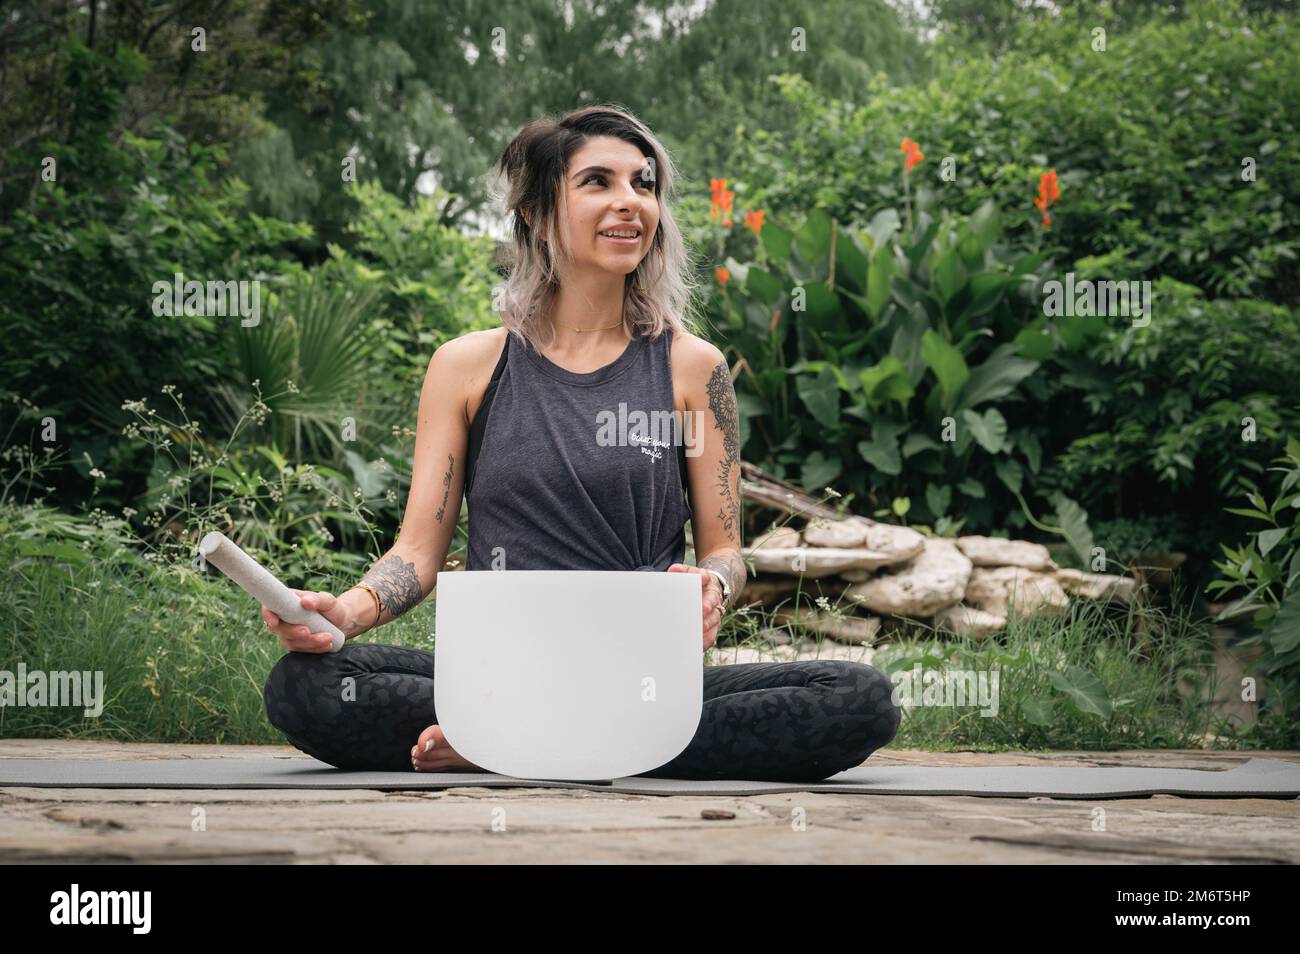 Melissa Aguirre, holistic life coach and stress management specialist, plays a Tibetan sound bowl while practicing yoga at Freedom Park on Brooke Army Medical Center, San Antonio, Texas, Ma4 4, 2022. Tibetan sound bowls are used in holistic practices for the unique tones they produce that can improve the synaptic responses in the brain. Aguirre incorporates them into mindfulness sessions she hosts for local U.S. Army Soldiers recovering from stress injuries and deployment trauma. Stock Photo